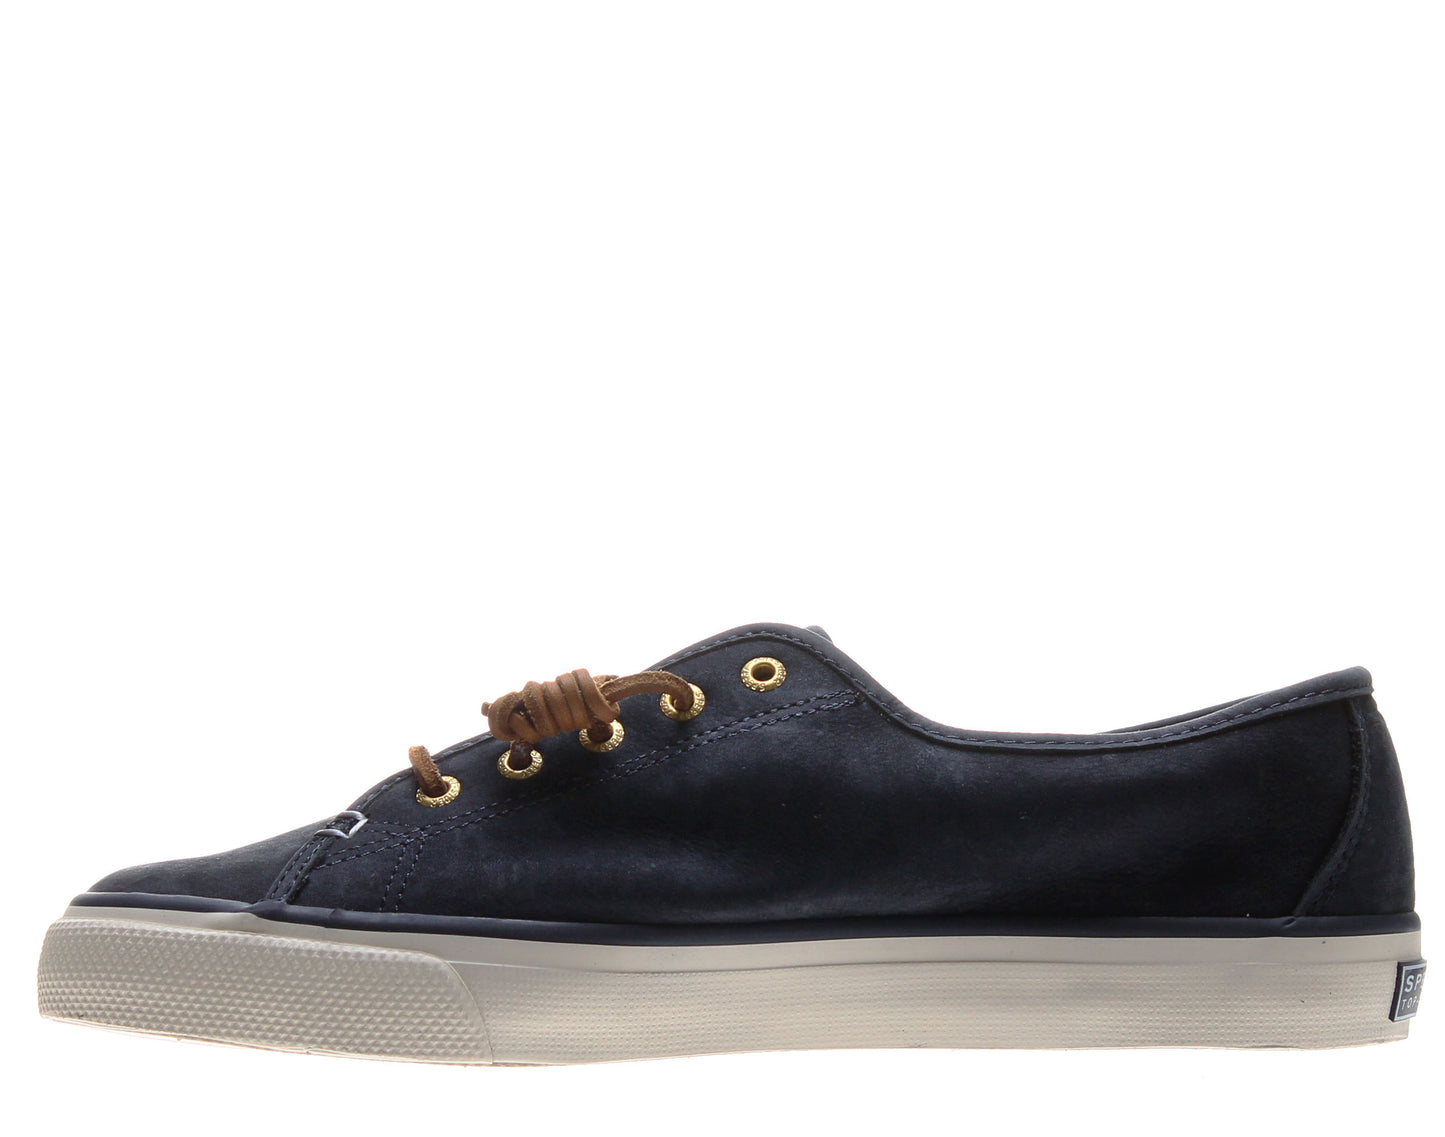 Sperry Top Sider Seacoast Nubuck Casual Women's Shoes